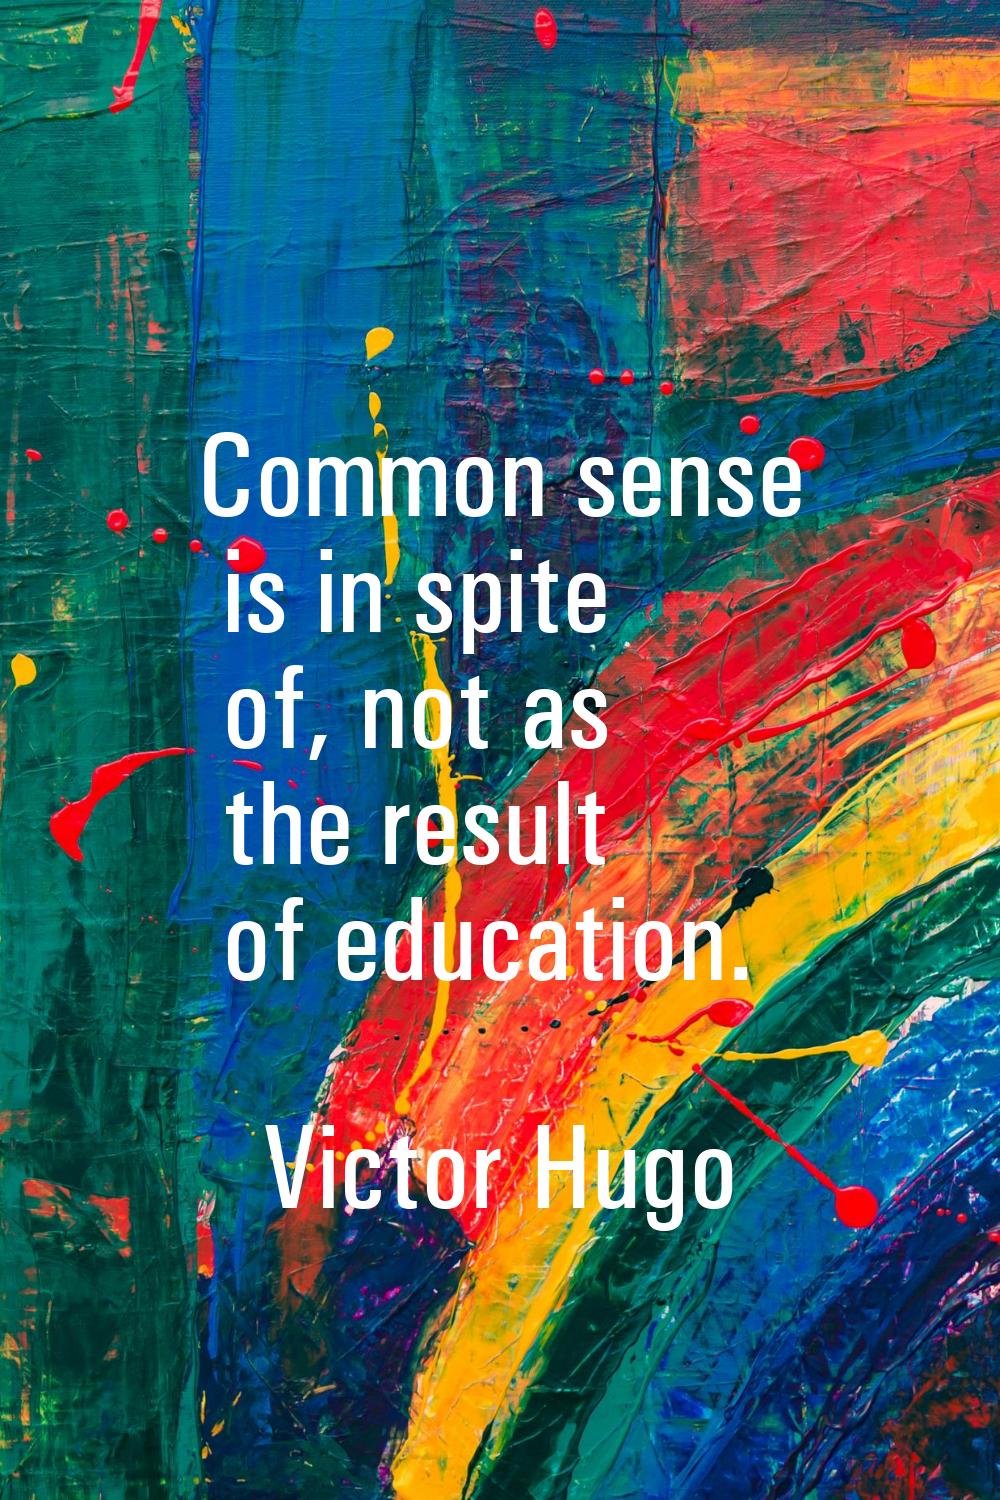 Common sense is in spite of, not as the result of education.